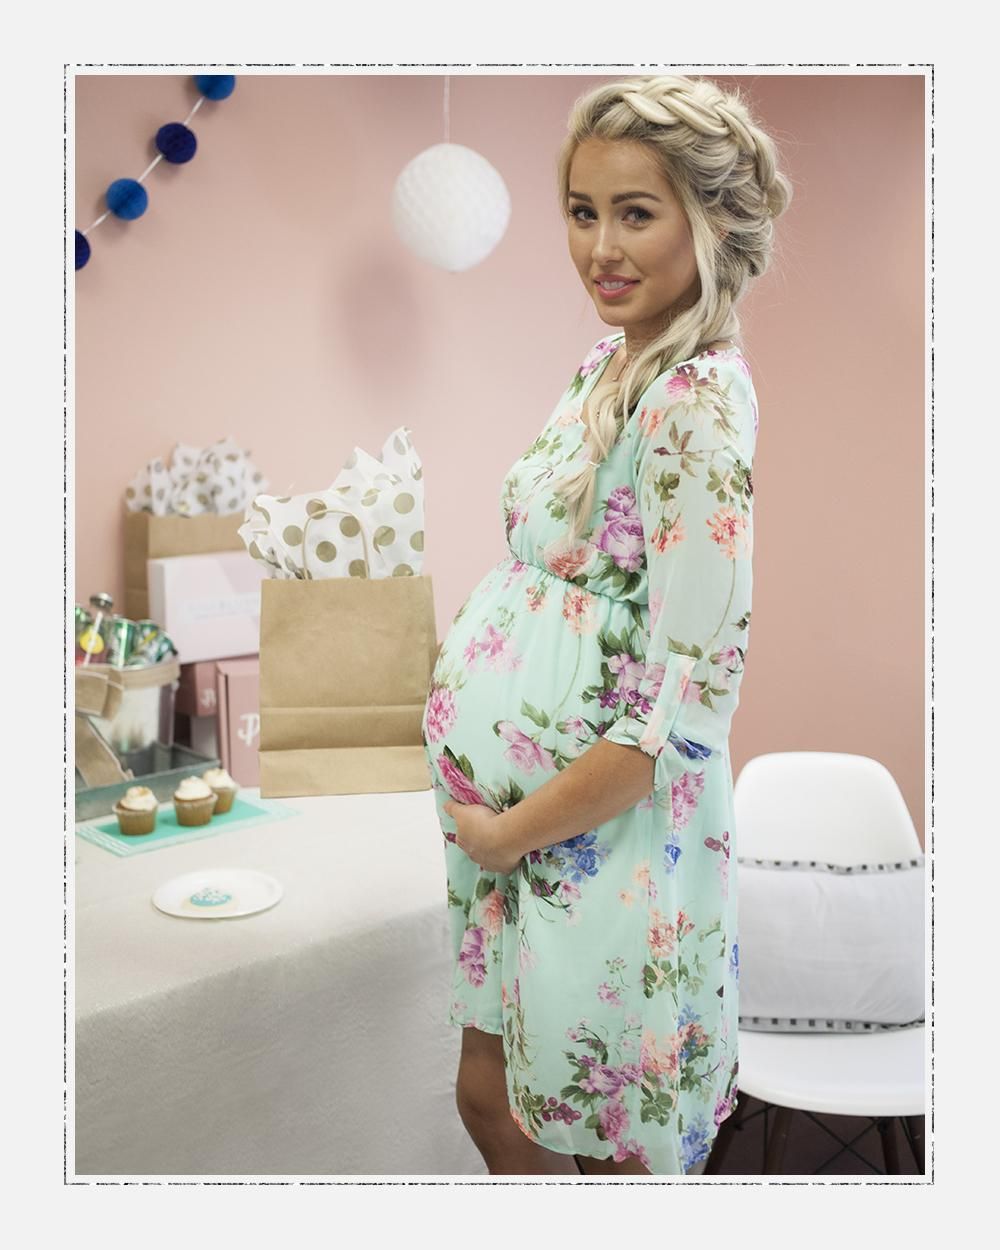 Full Size of Baby Shower:petite Maternity Dresses For Baby Shower Forever 21 Maternity Celebrity Baby Shower Dresses Inexpensive Maternity Clothes Maternity Gown Style Maternity Stores Near Me Plus Size Maternity Clothes Cheap Maternity Jeans